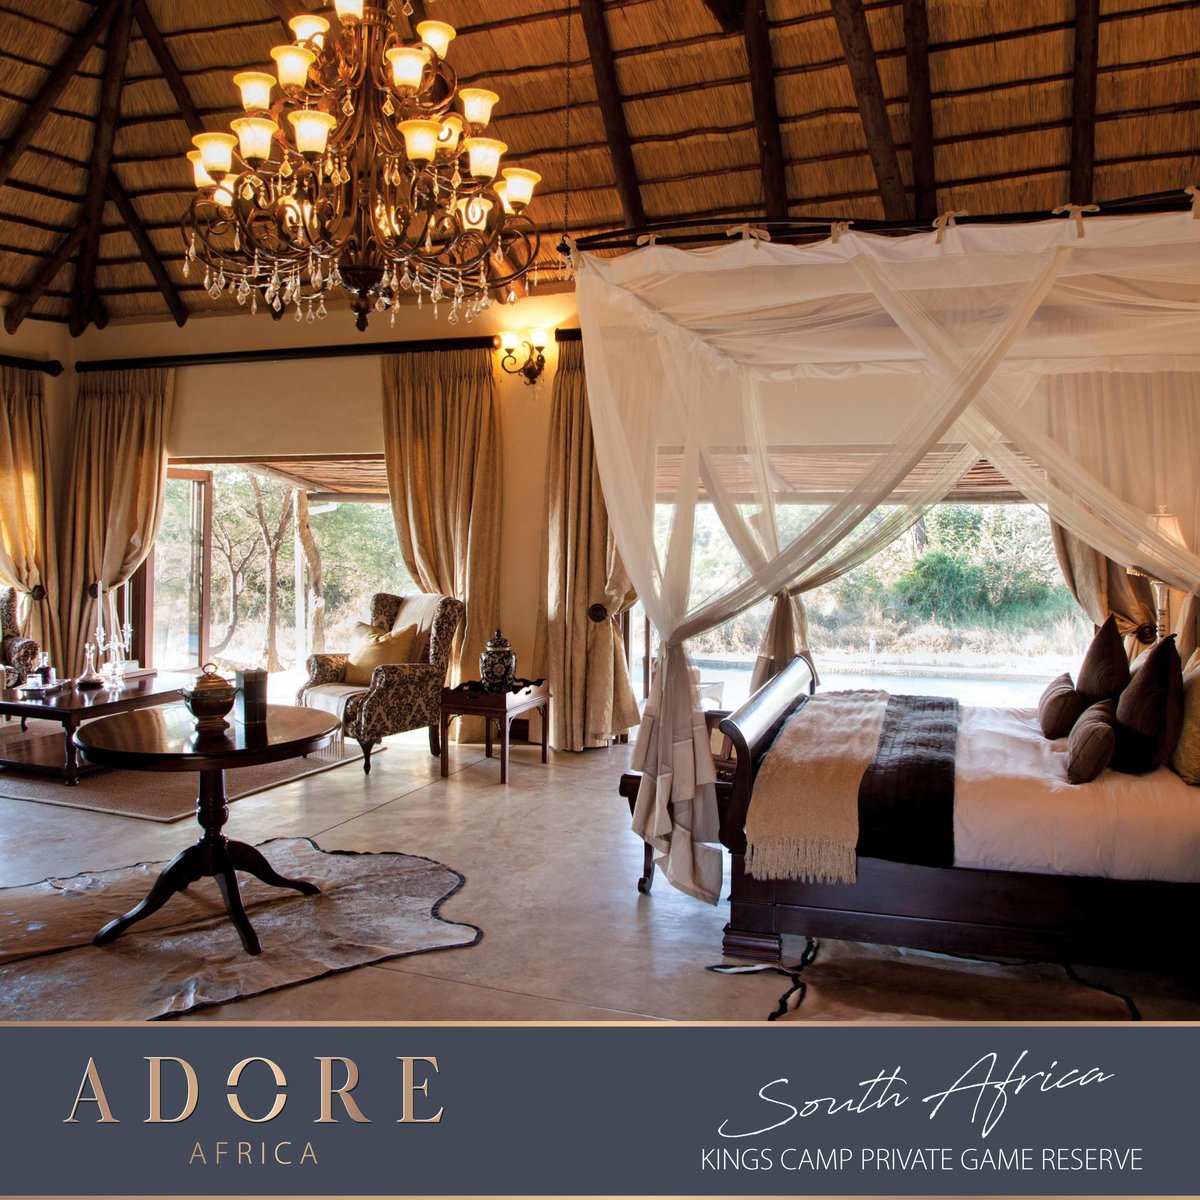 Ultimate opulence awaits at the Waterbuck Private Camp in #KingsCampPrivateGameReserve.  

View more bit.ly/3HYwjLL
#ADOREAfrica